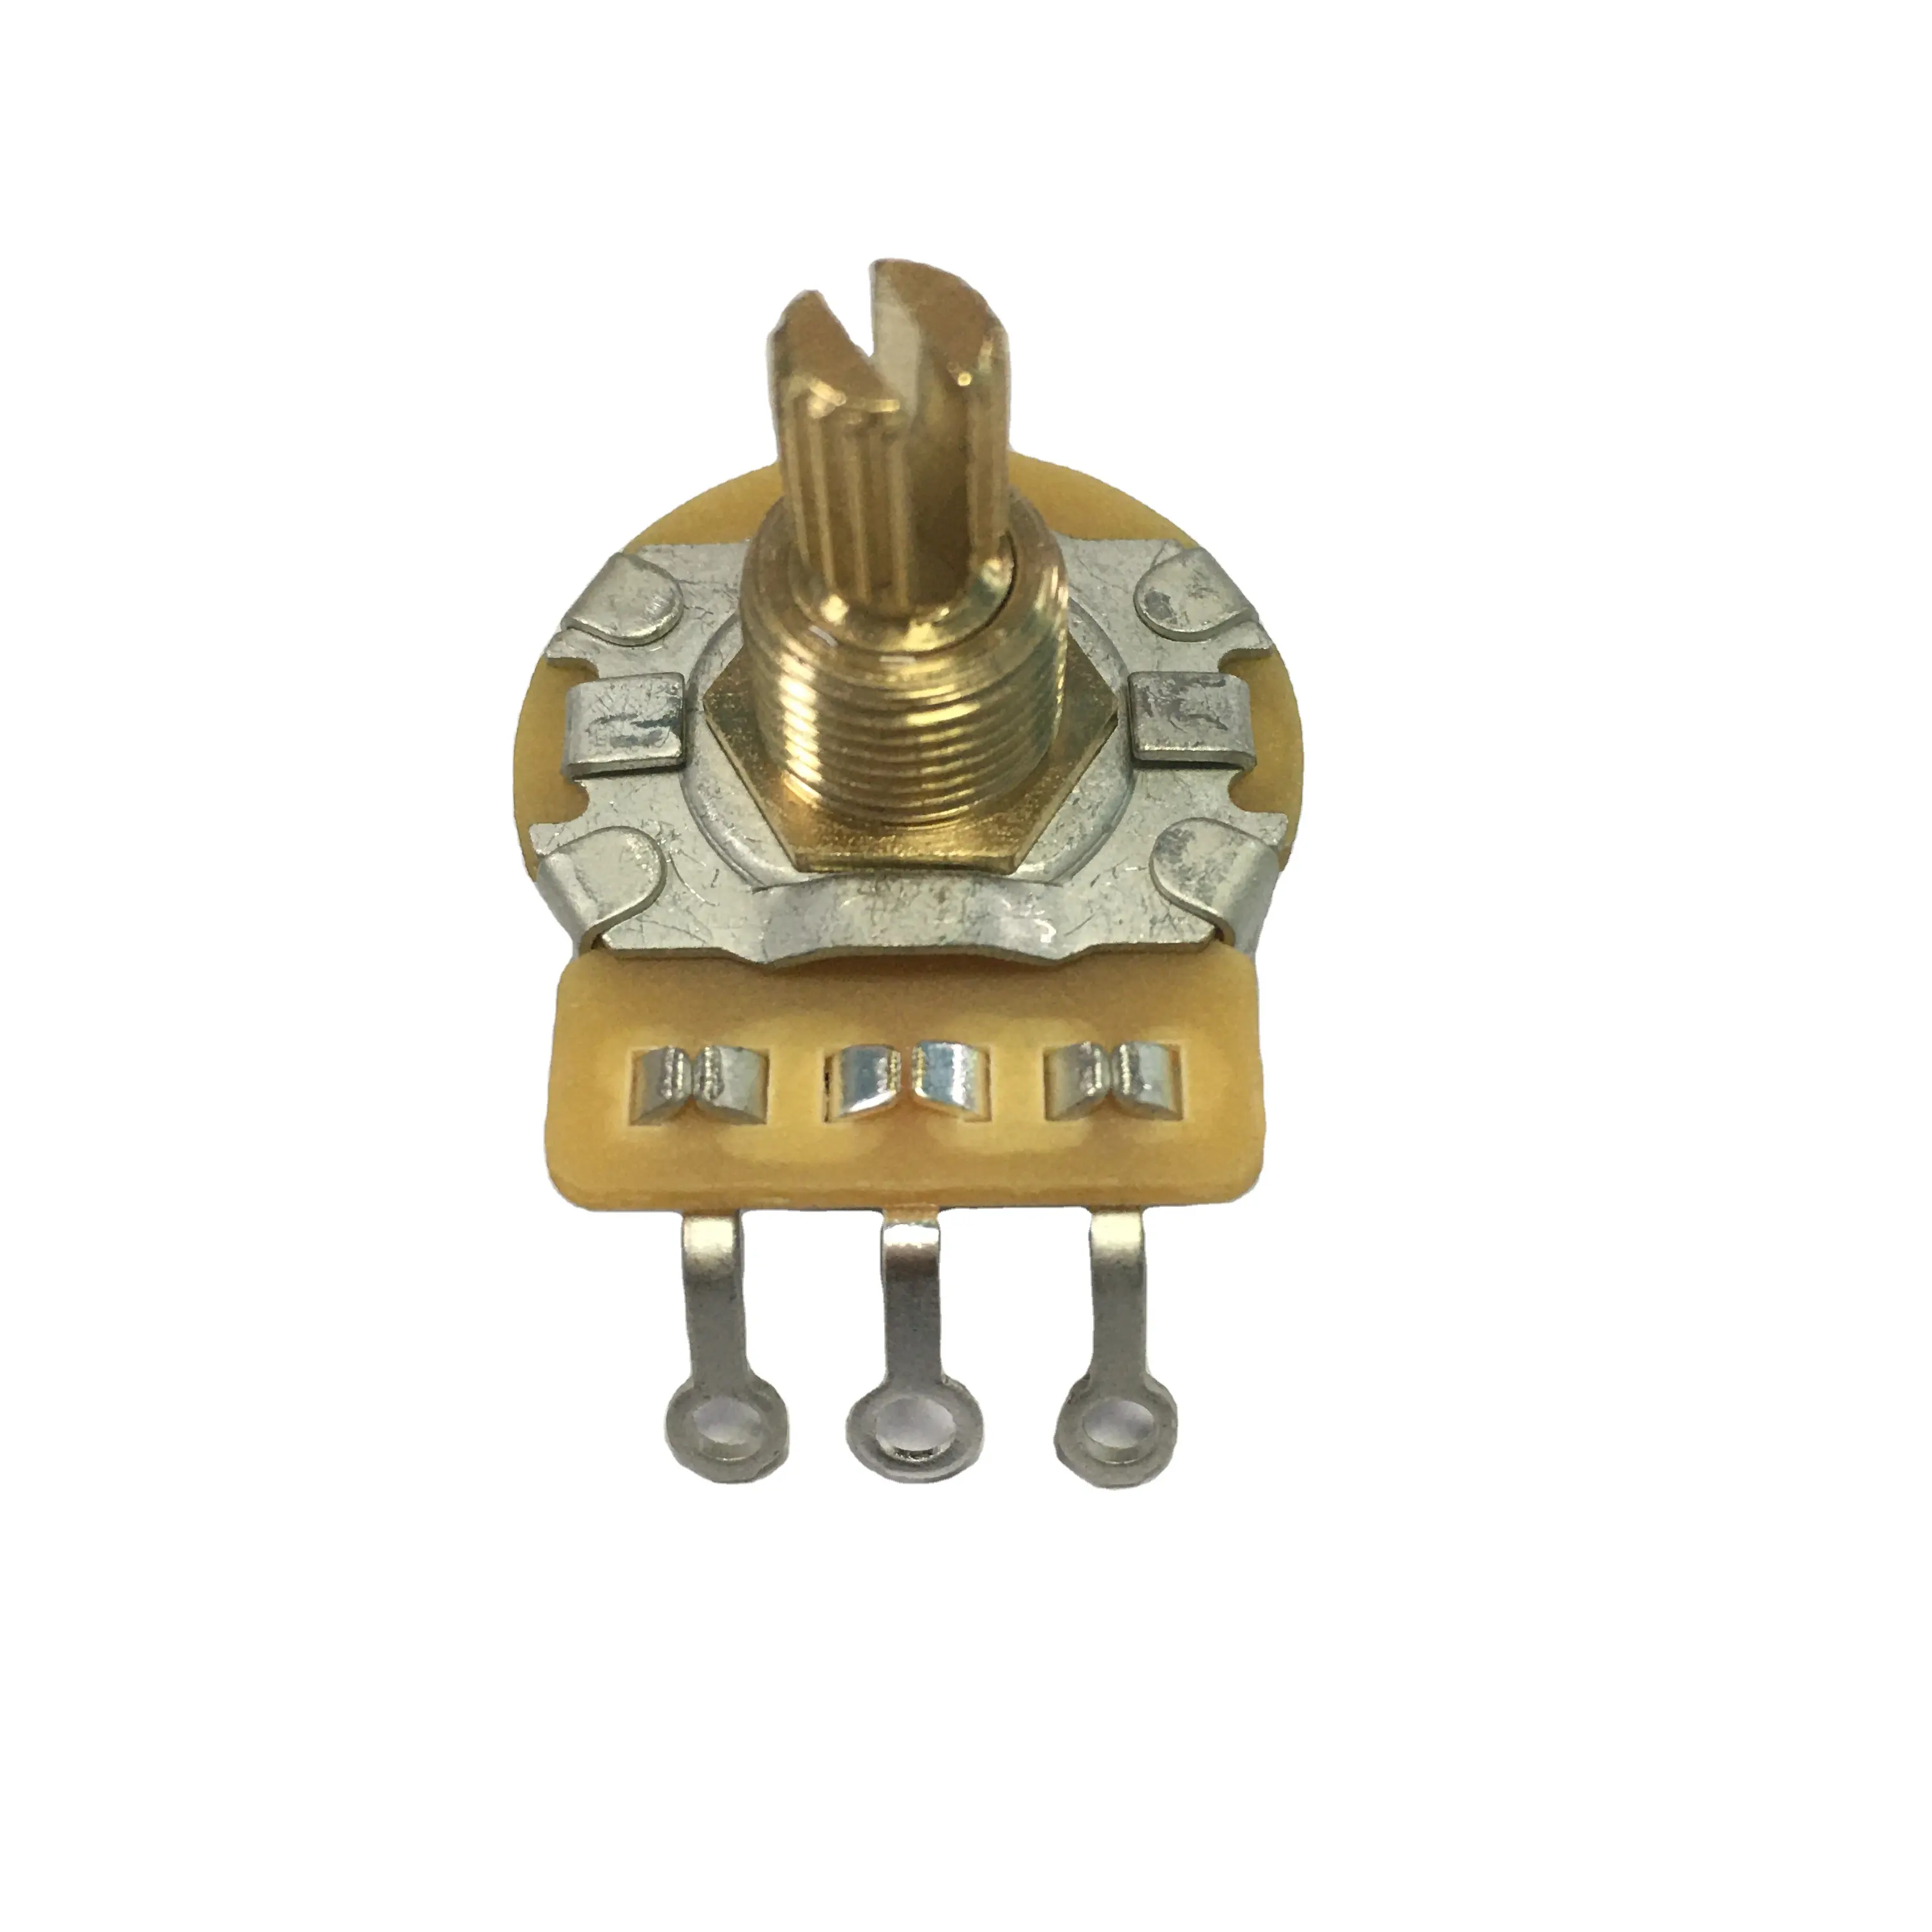 Hot Sales 24mm 10K Rotary Potentioneter with Switch CTS Structure Soldering Terminals Potentiometer with Switch